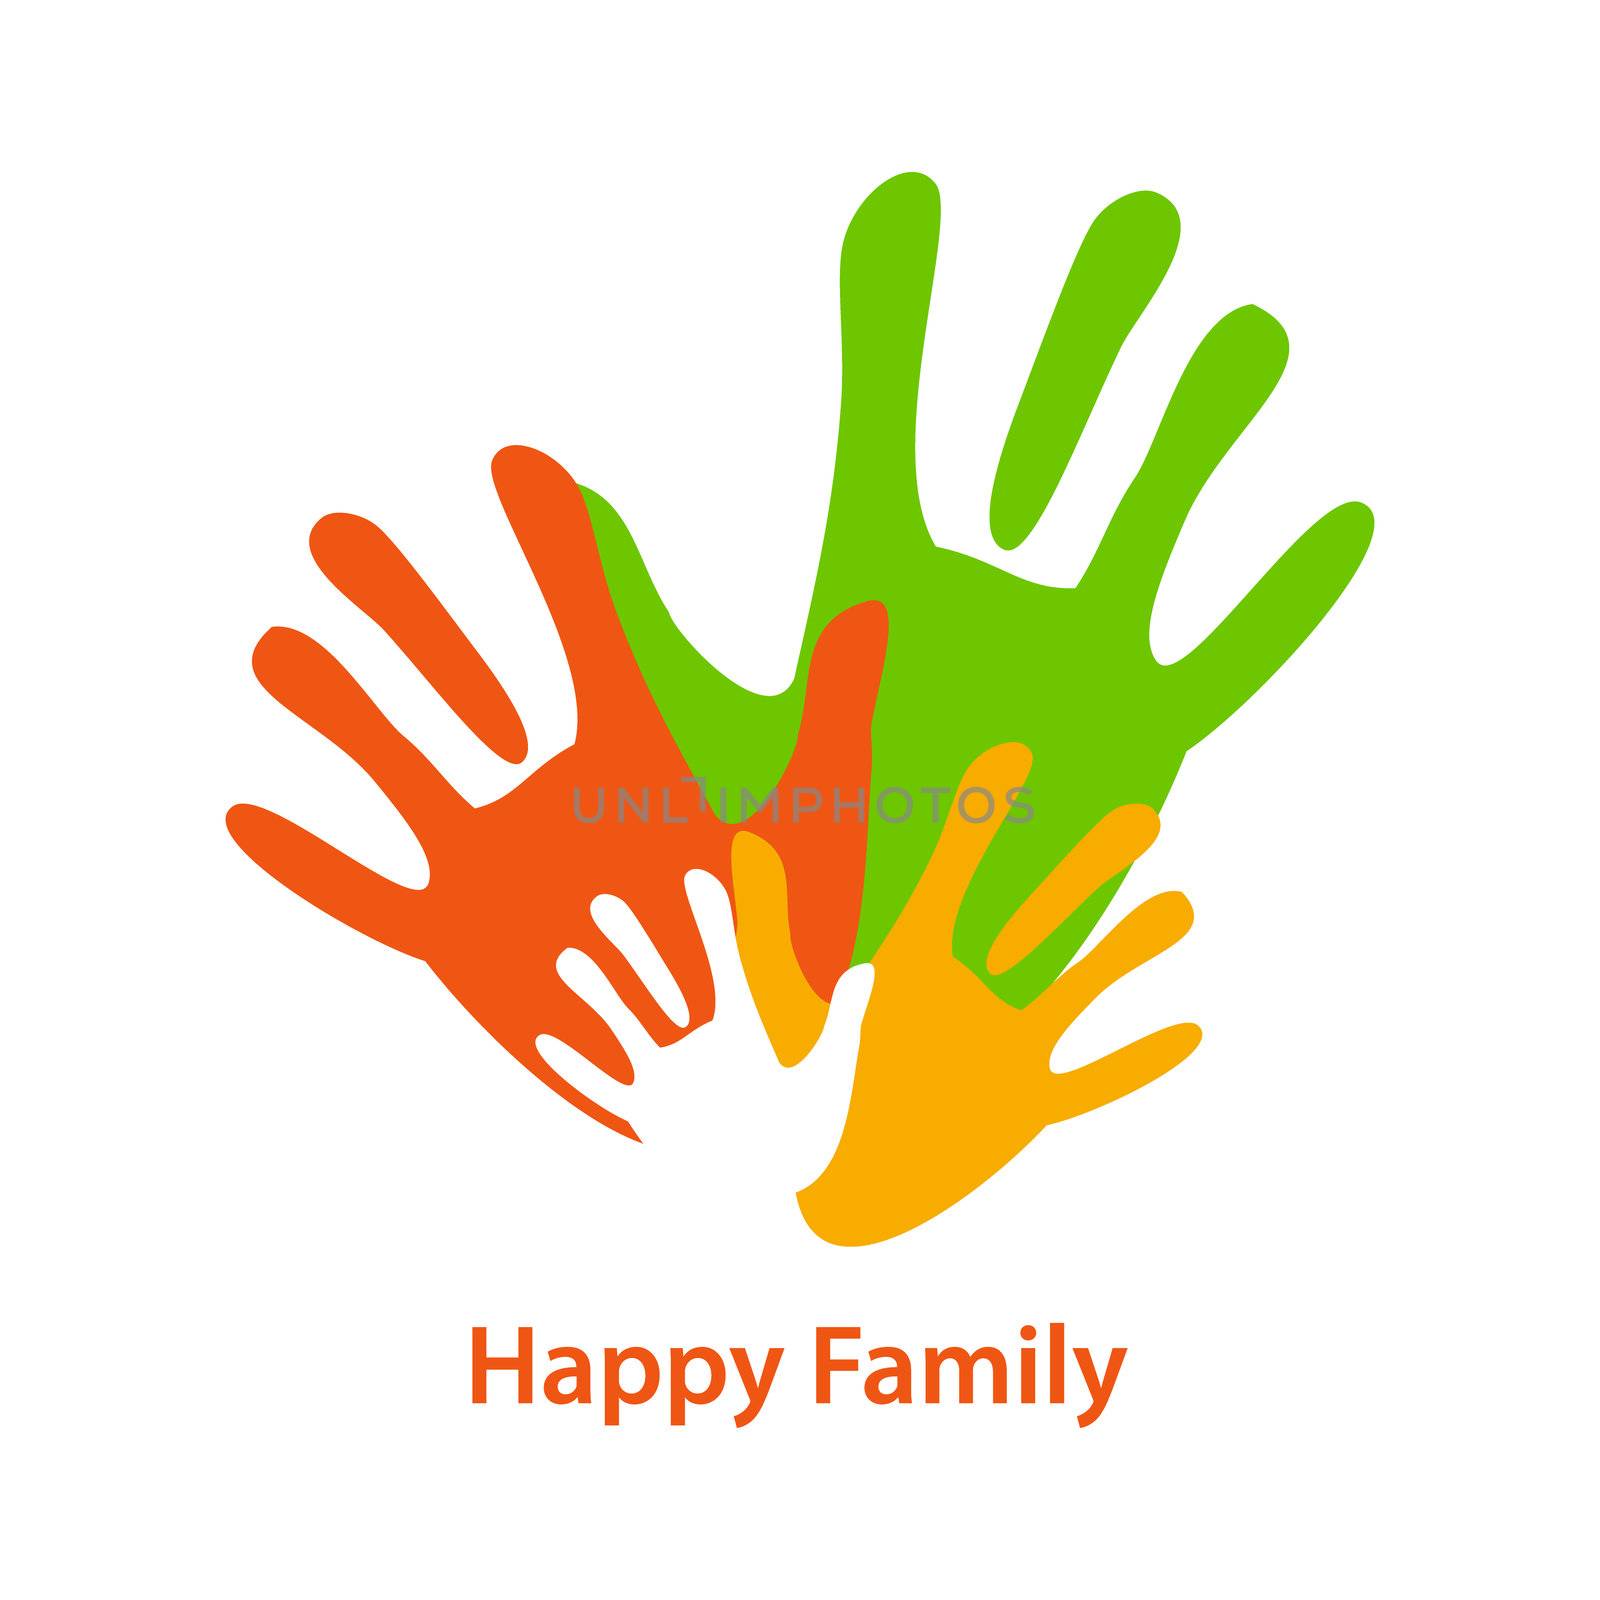 Sign of a happy family - colored hand - mothers, fathers and children.